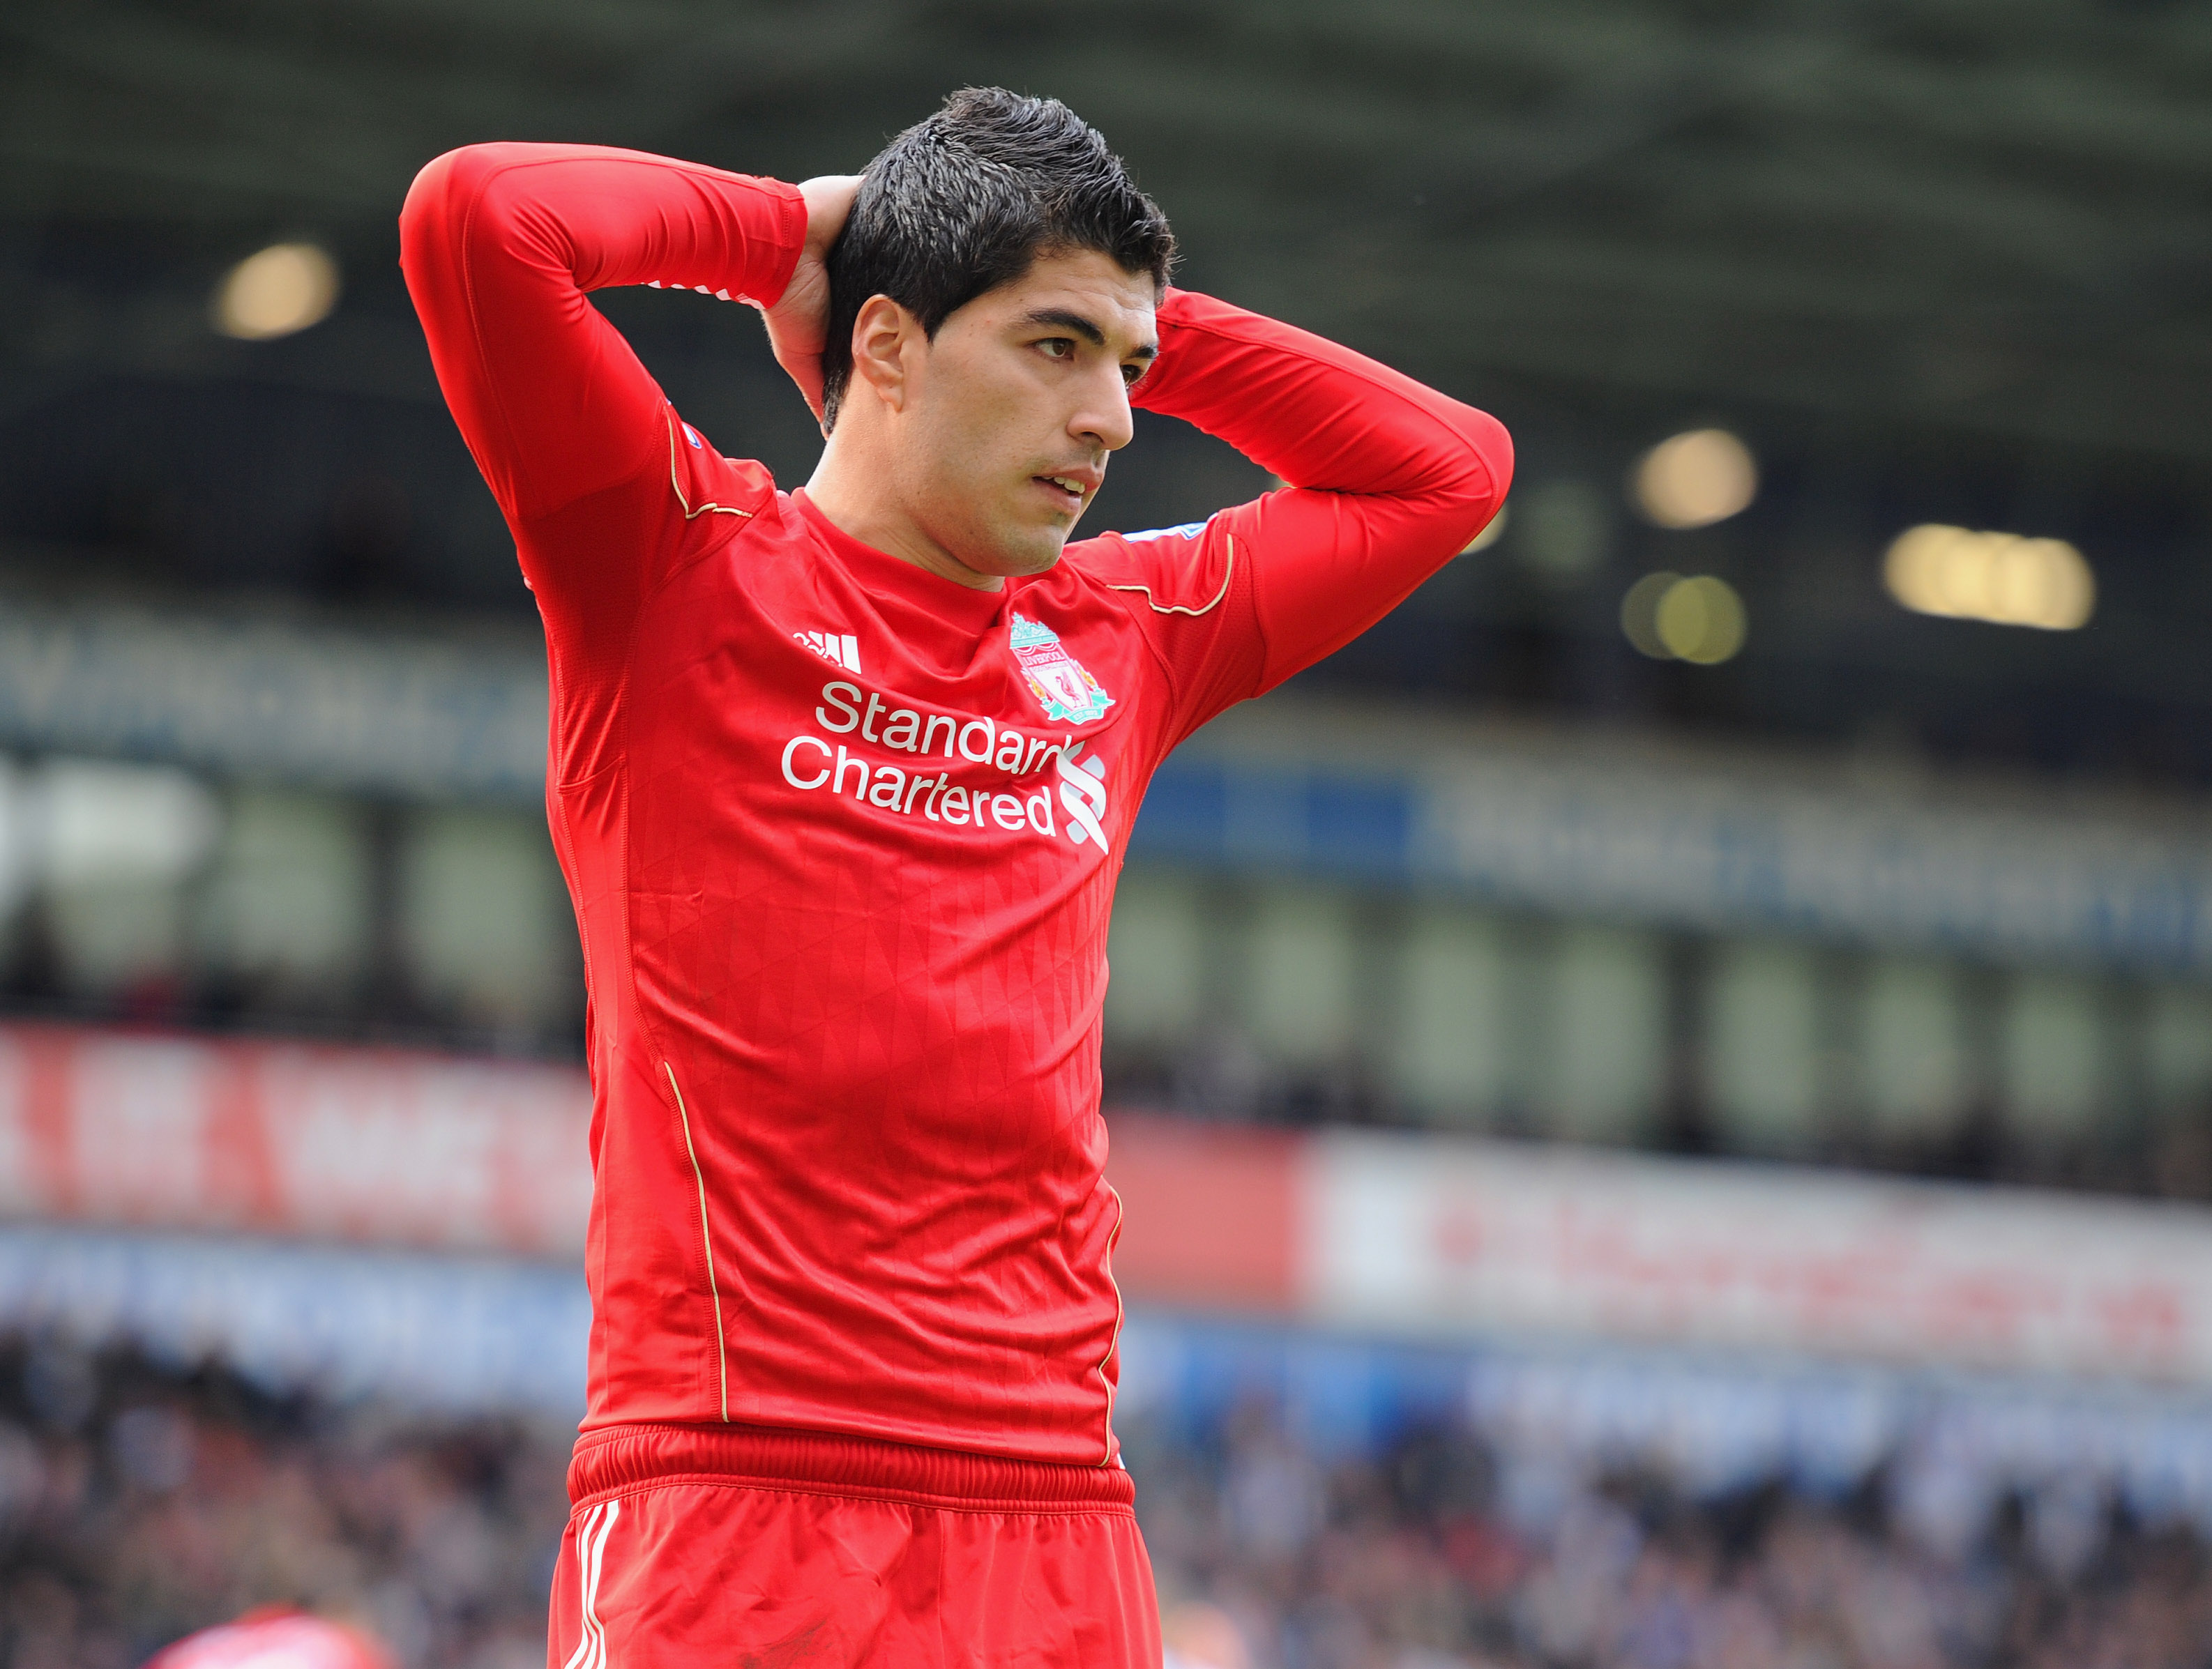 WEST BROMWICH, ENGLAND - APRIL 02: Luis Suarez of Liverpool looks dejected during the Barclays Premier League match between West Bromwich Albion and Liverpool at The Hawthorns on April 2, 2011 in West Bromwich, England.  (Photo by Michael Regan/Getty Imag